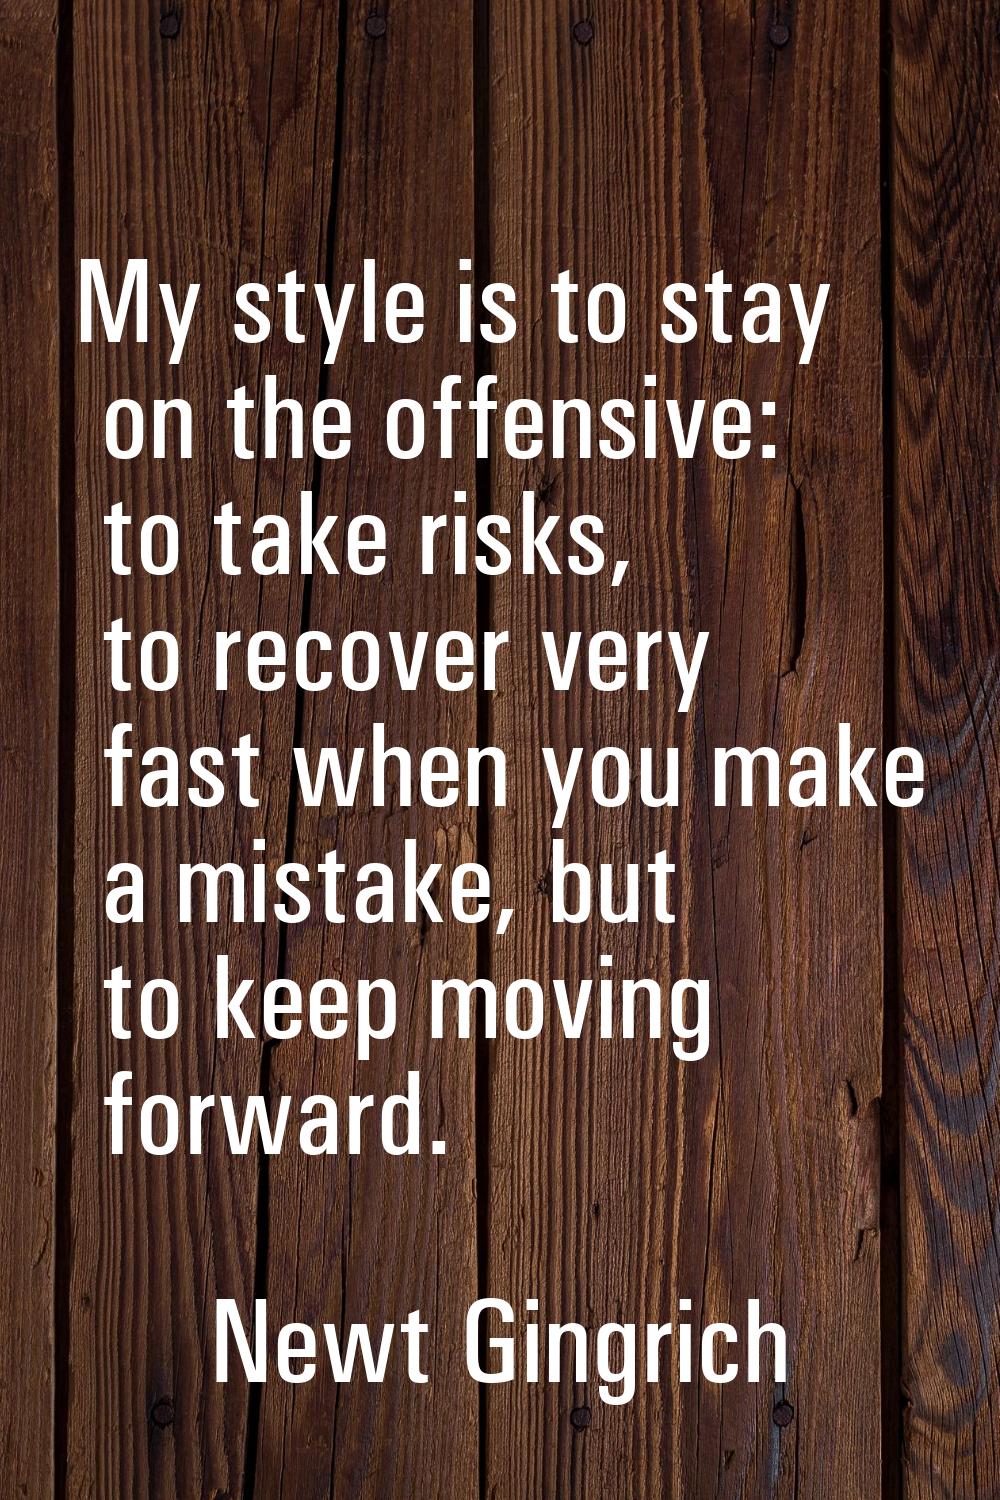 My style is to stay on the offensive: to take risks, to recover very fast when you make a mistake, 